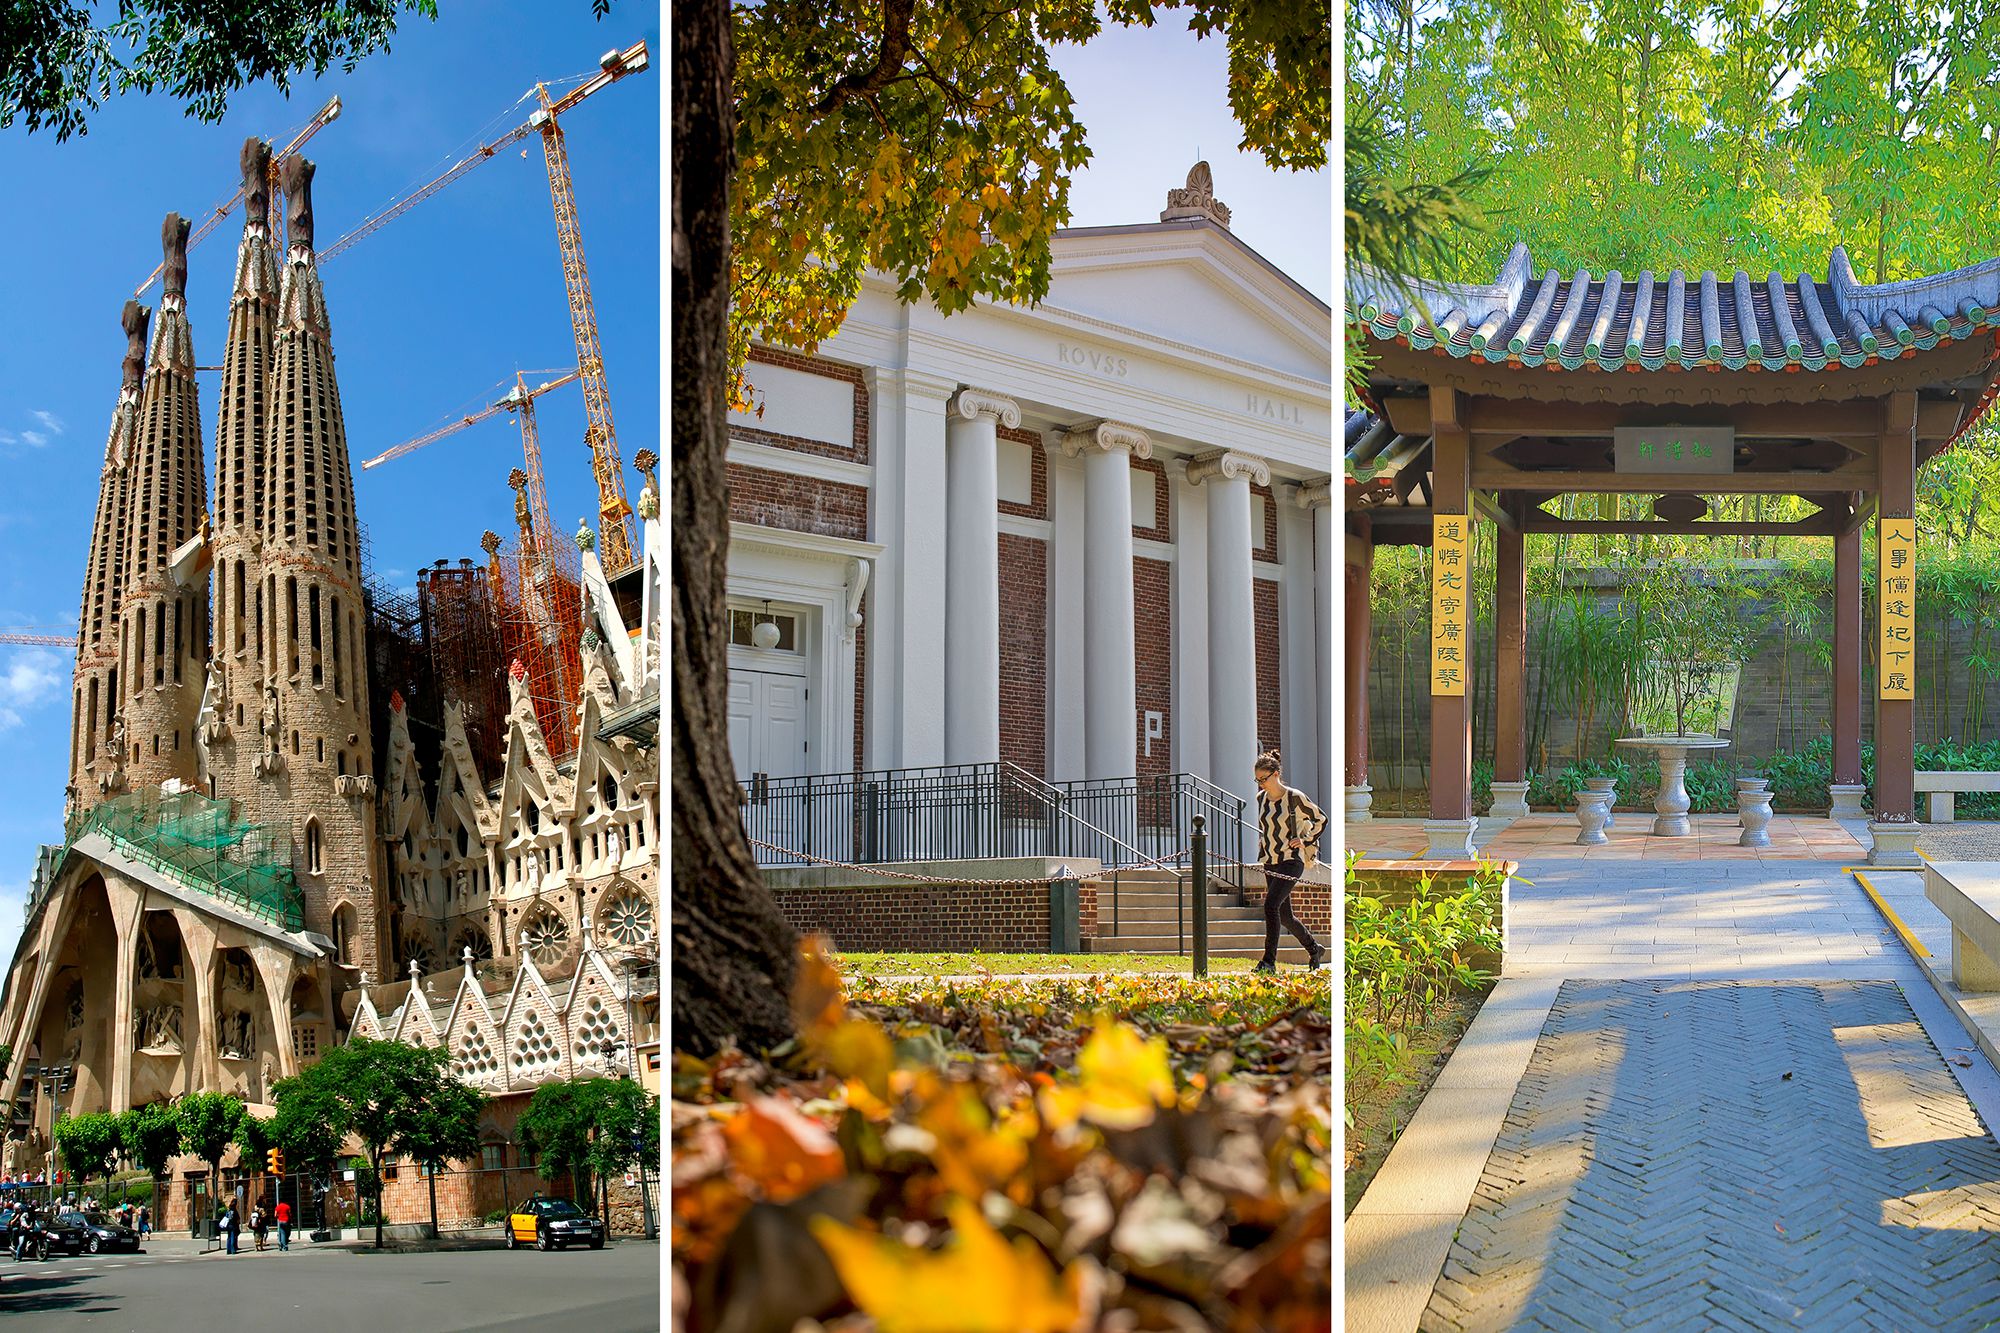 Images of elaborate buildings.  Left to right:  ESADE Business School in Barcelona, Spain, Rowss Hall  at UVA, and Lingnan (University) College at Sun Yat-sen University in Guangzhou, China.